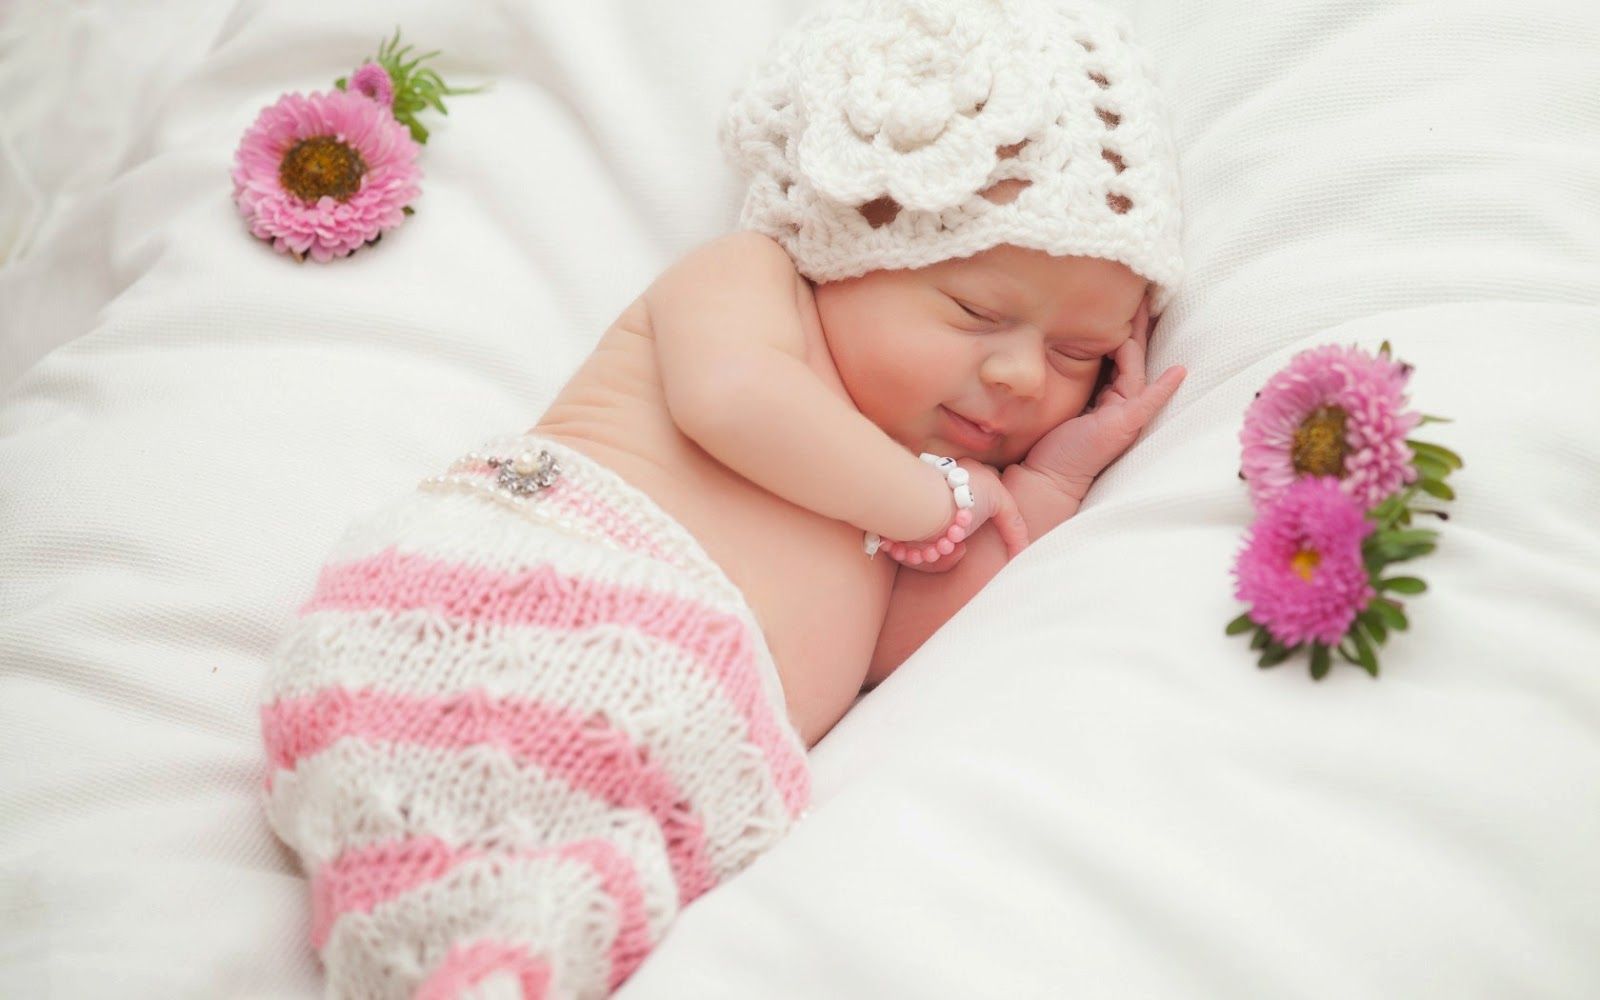 Cute baby sleeping image HD photo wallpaper Picture